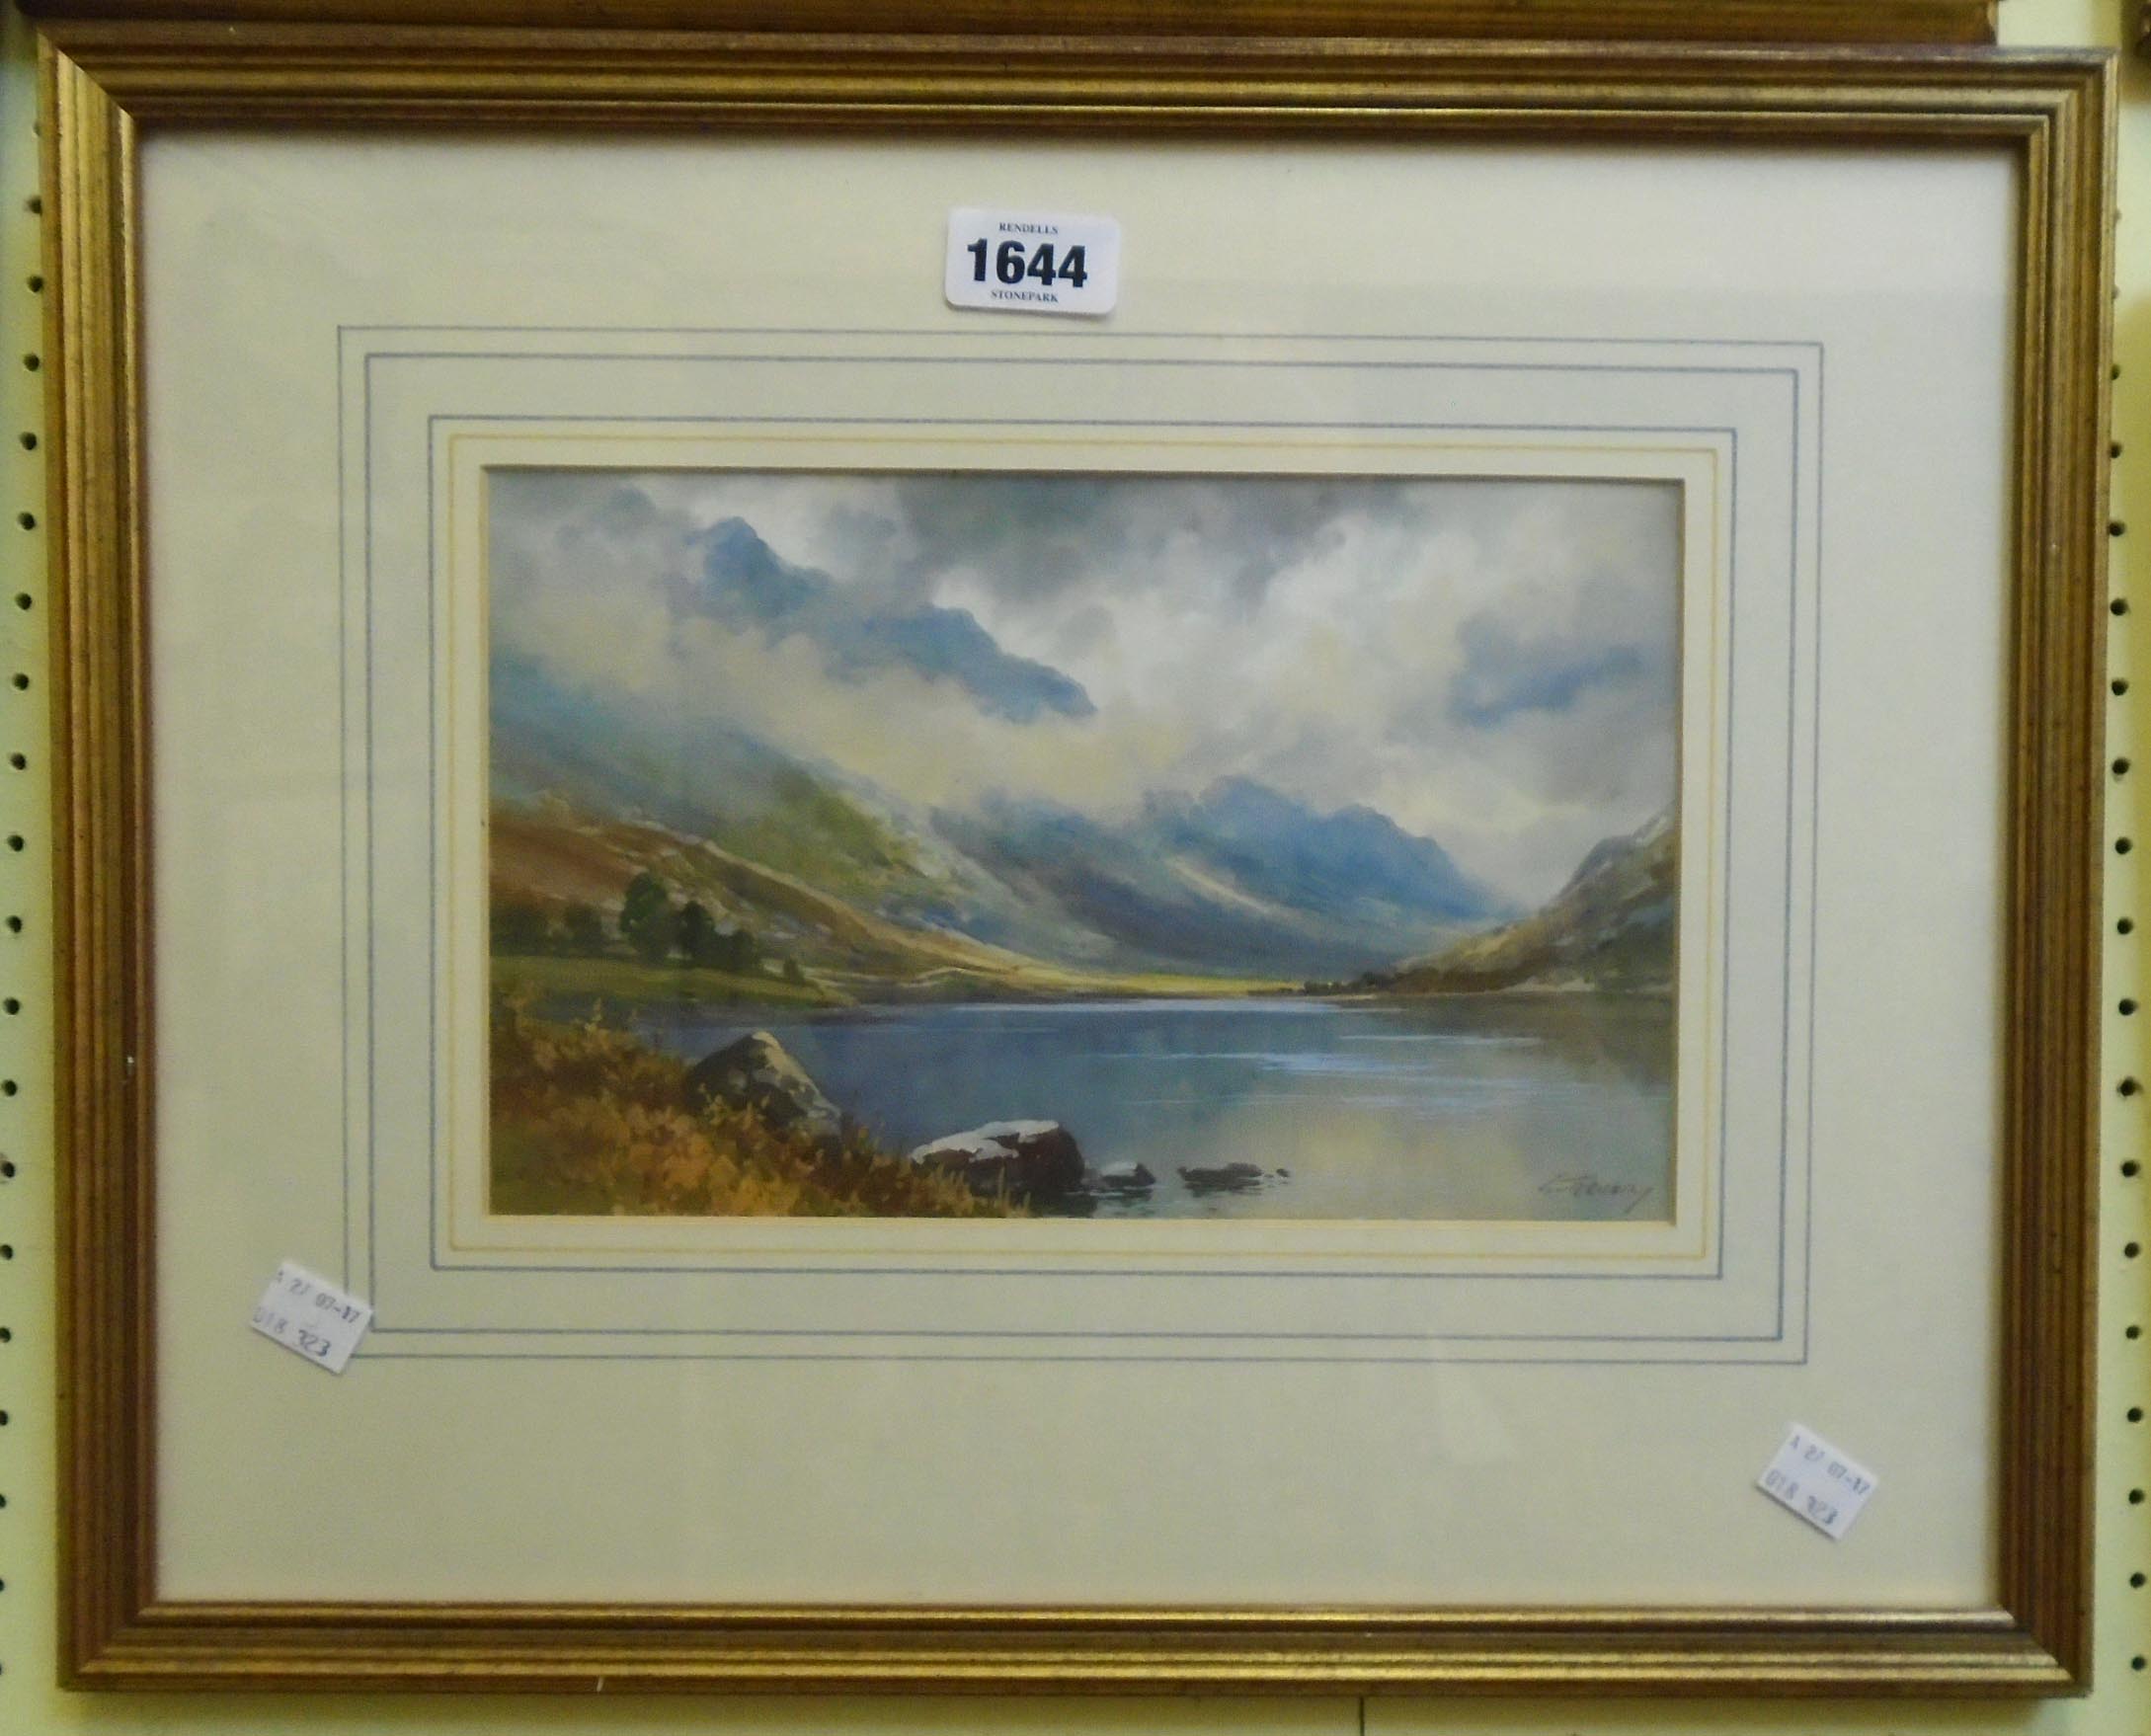 G. Trevor: a gilt framed watercolour, depicting a lakeland view - signed